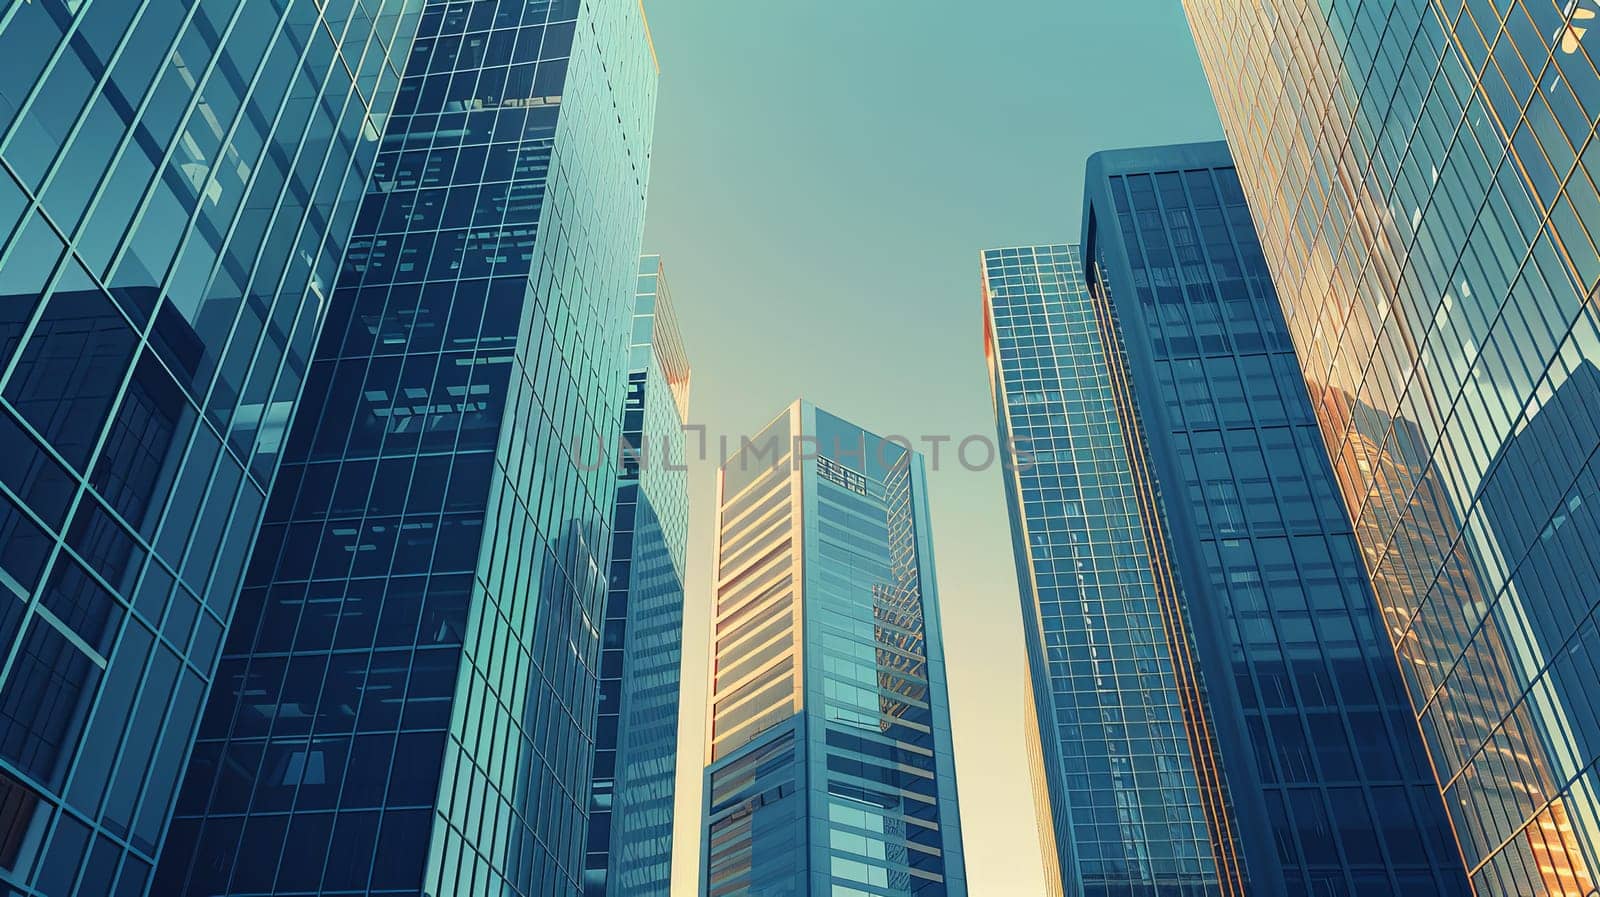 A cluster of tall buildings in an urban financial center, showcasing modern architecture and bustling city life.